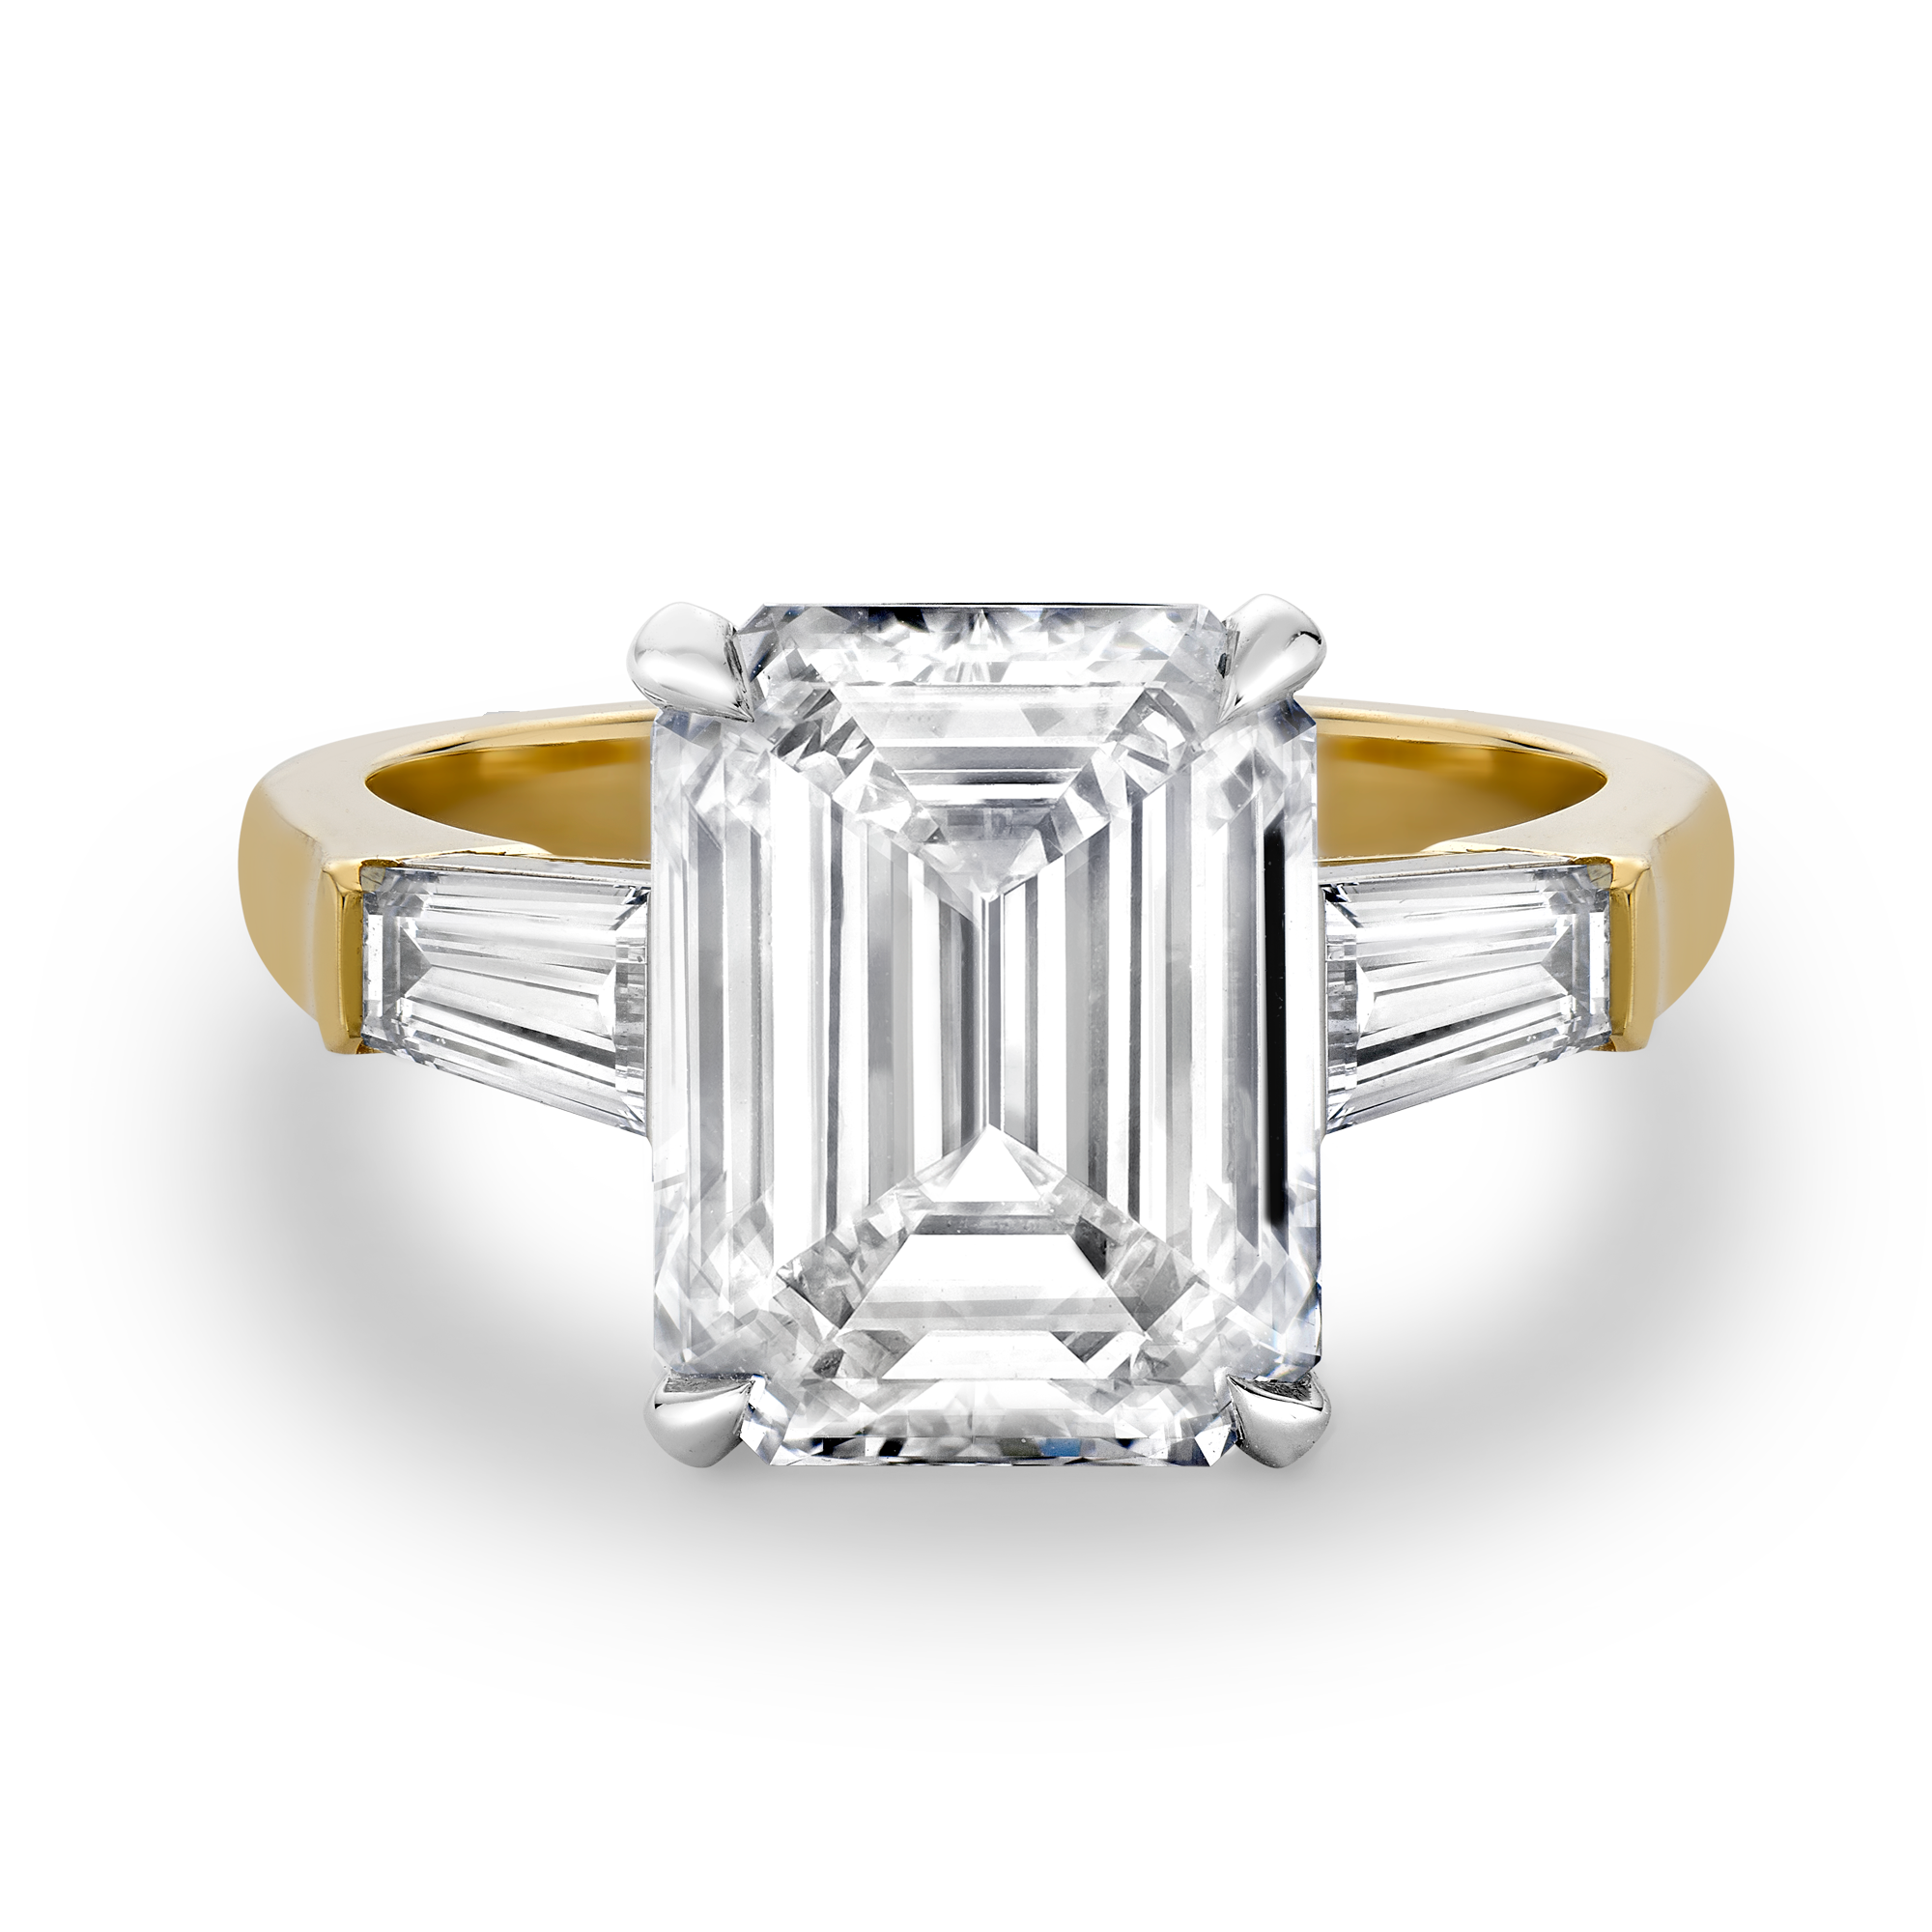 Regency 5.02ct Diamond Solitaire Ring Emerald Cut, Claw Set_2